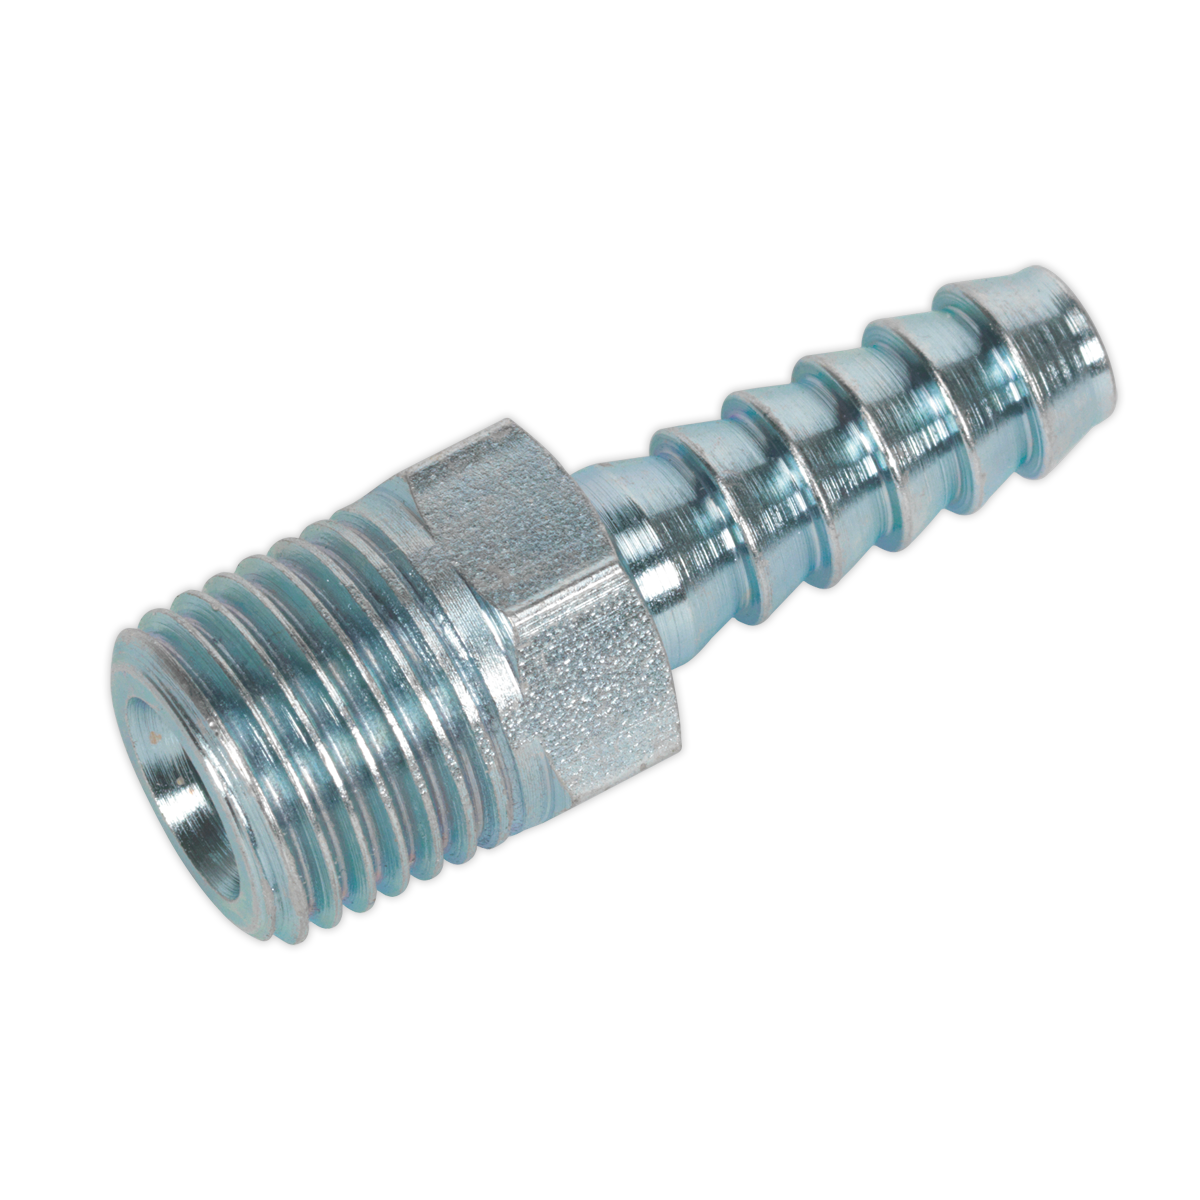 Screwed Tailpiece Male 1/4"BSPT - 1/4" Hose Pack of 5 - AC08 - Farming Parts